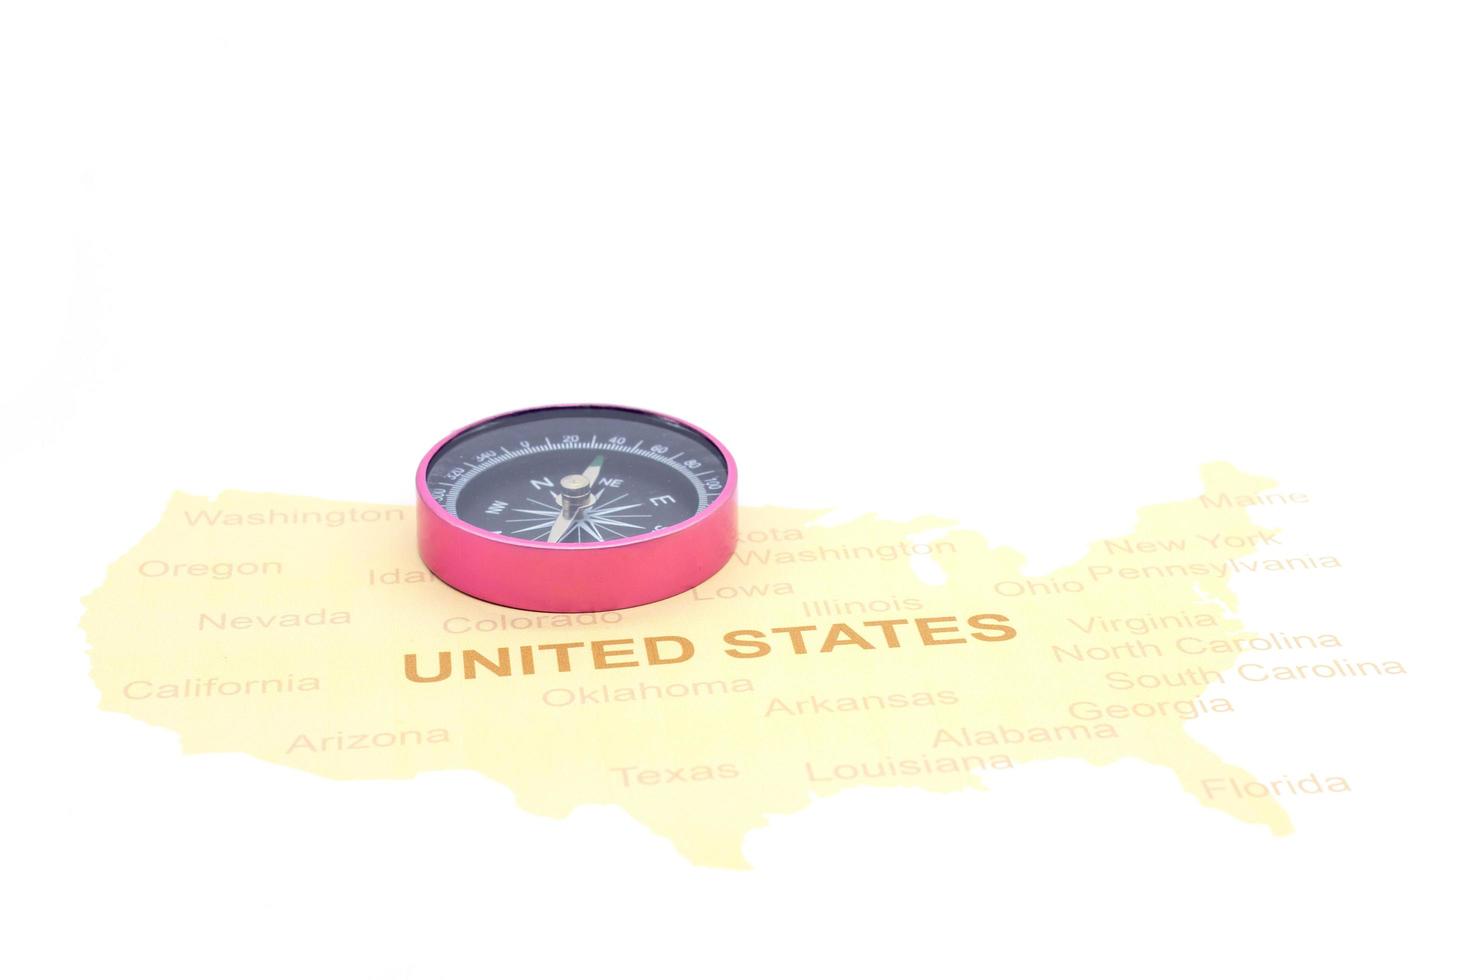 compass and coins on a American map. business travel concept photo